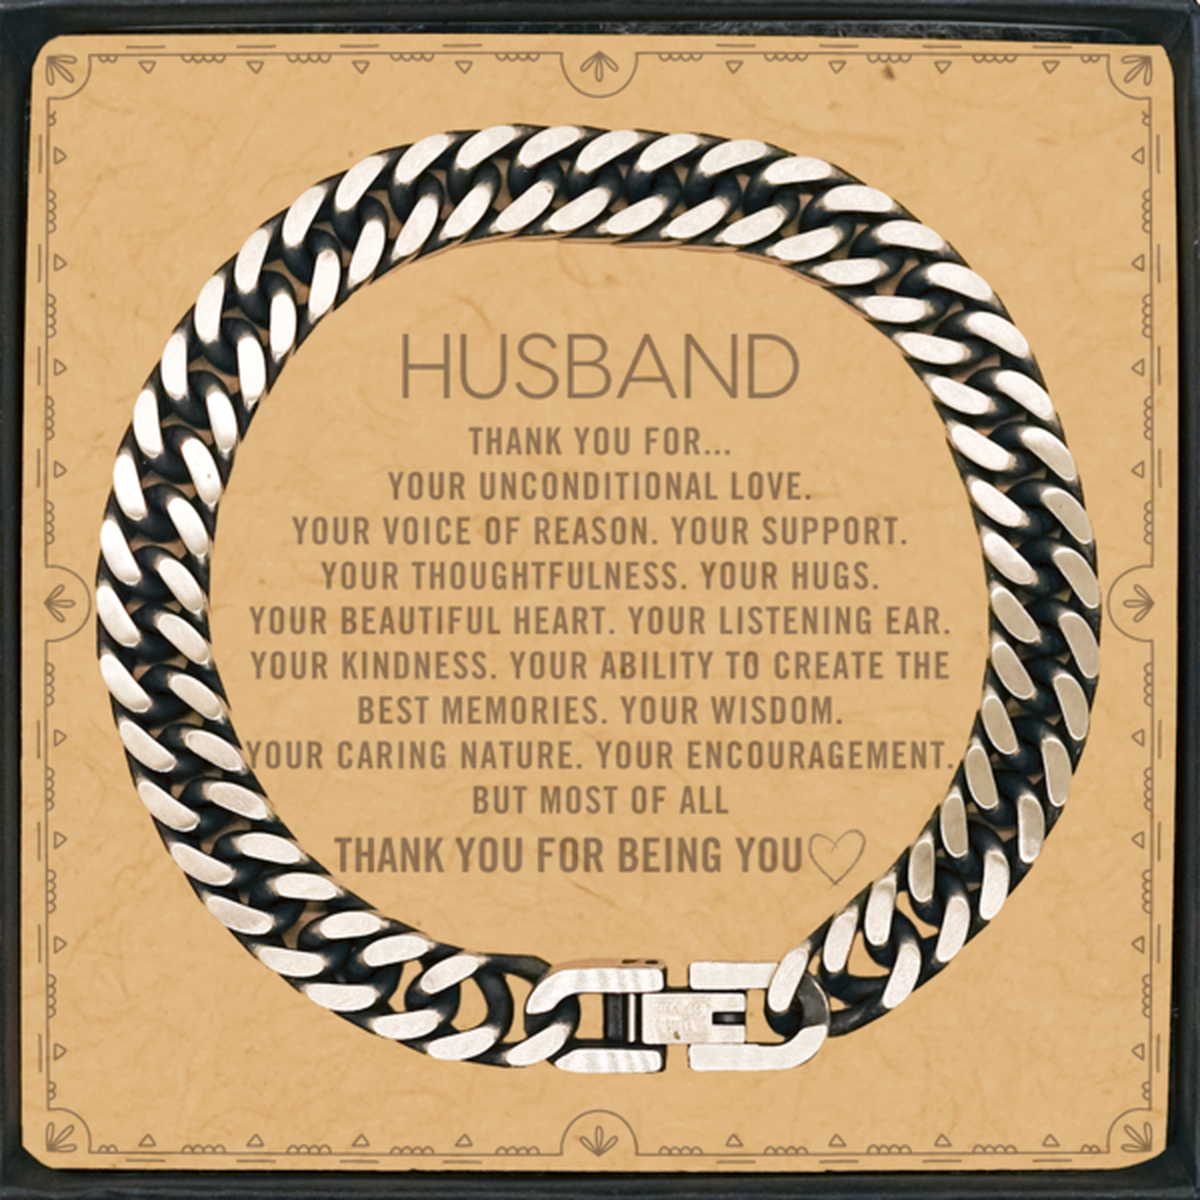 Husband Cuban Link Chain Bracelet Custom, Message Card Gifts For Husband Christmas Graduation Birthday Gifts for Men Women Husband Thank you for Your unconditional love